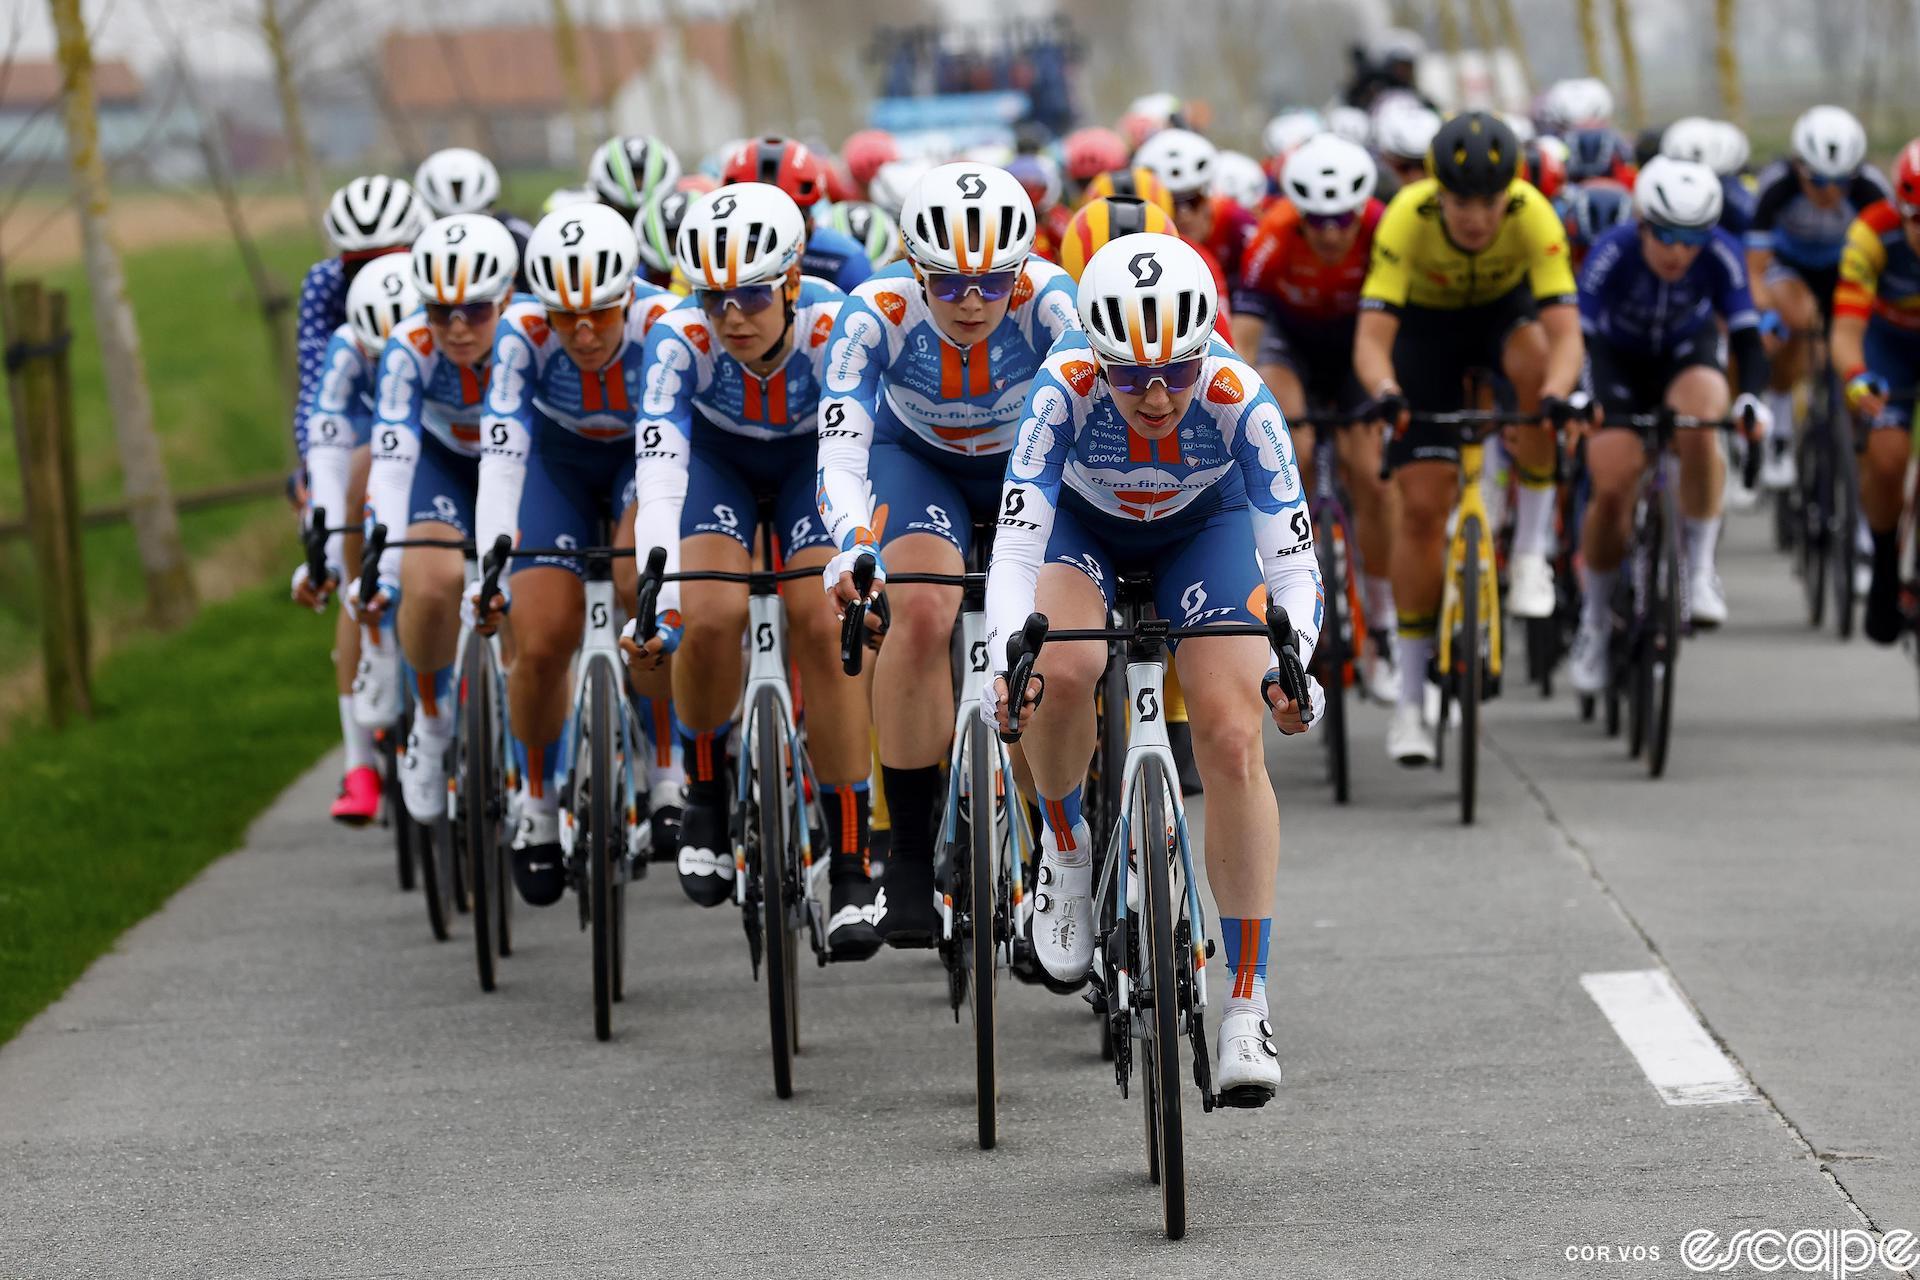 DSM Firmenich-PostNL riders are fanned out across the front of the pack at Brugge-De Panne while other teams sit in behind.